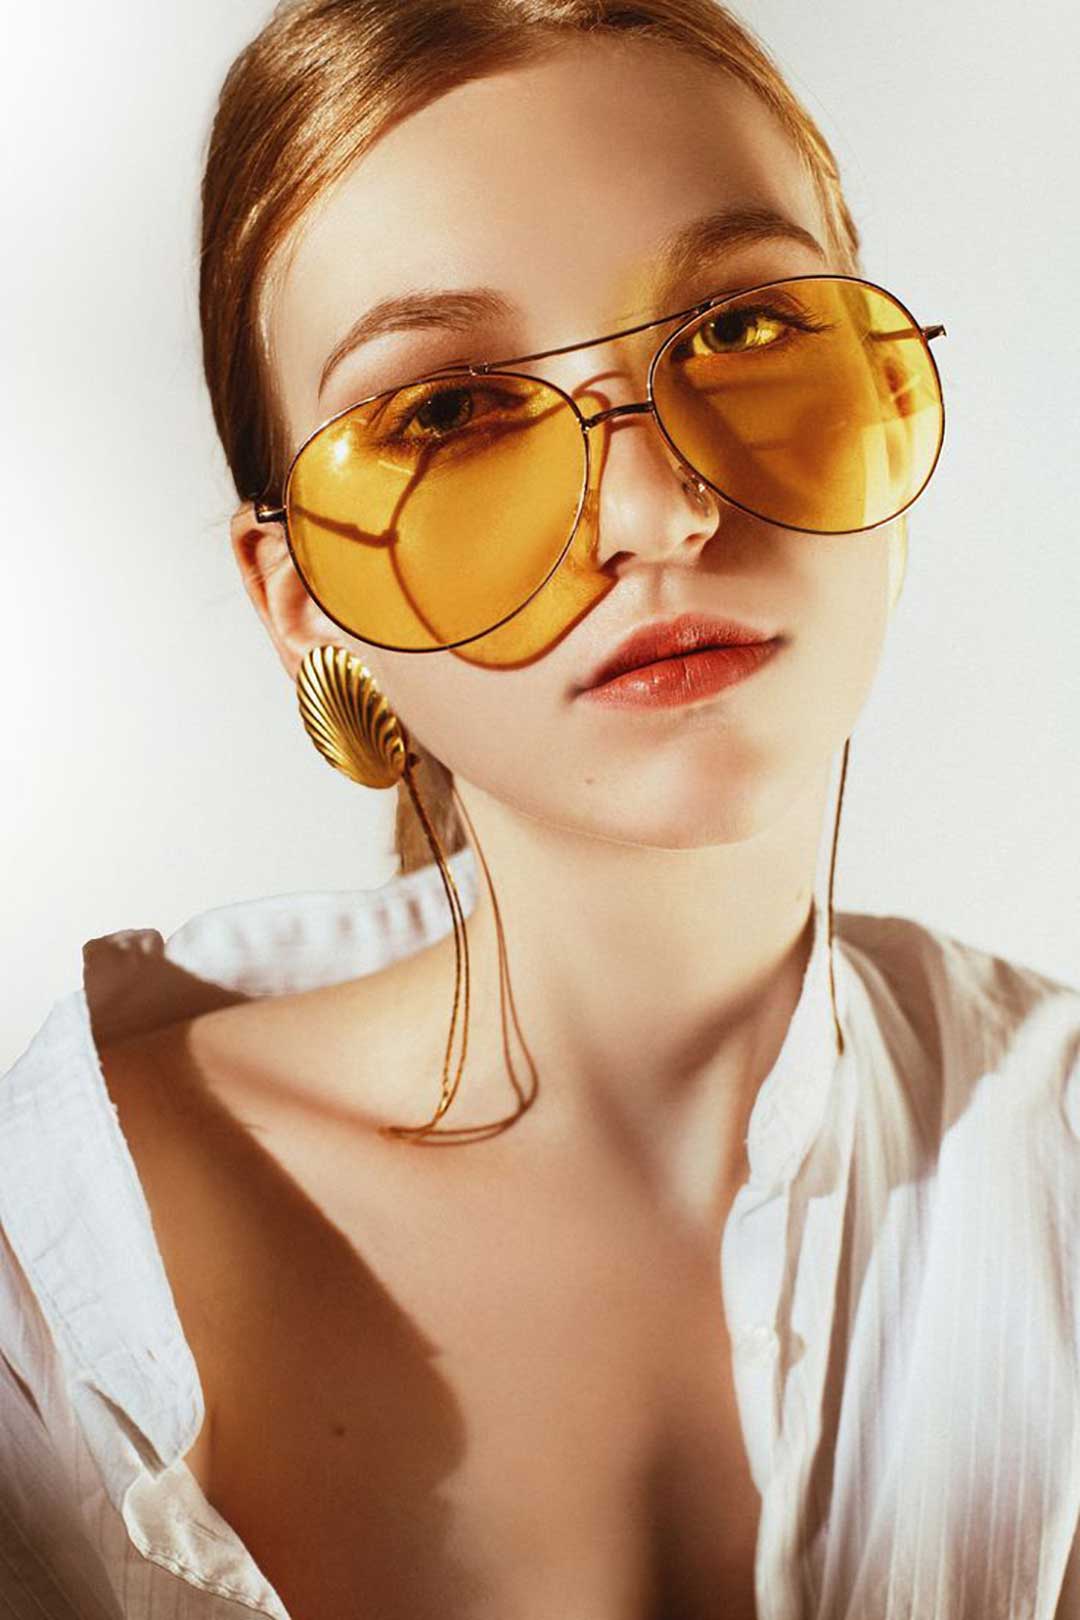 Ginger haired lady wearing very large wire Aviator eyeglasses with lightly tinted orange lenses